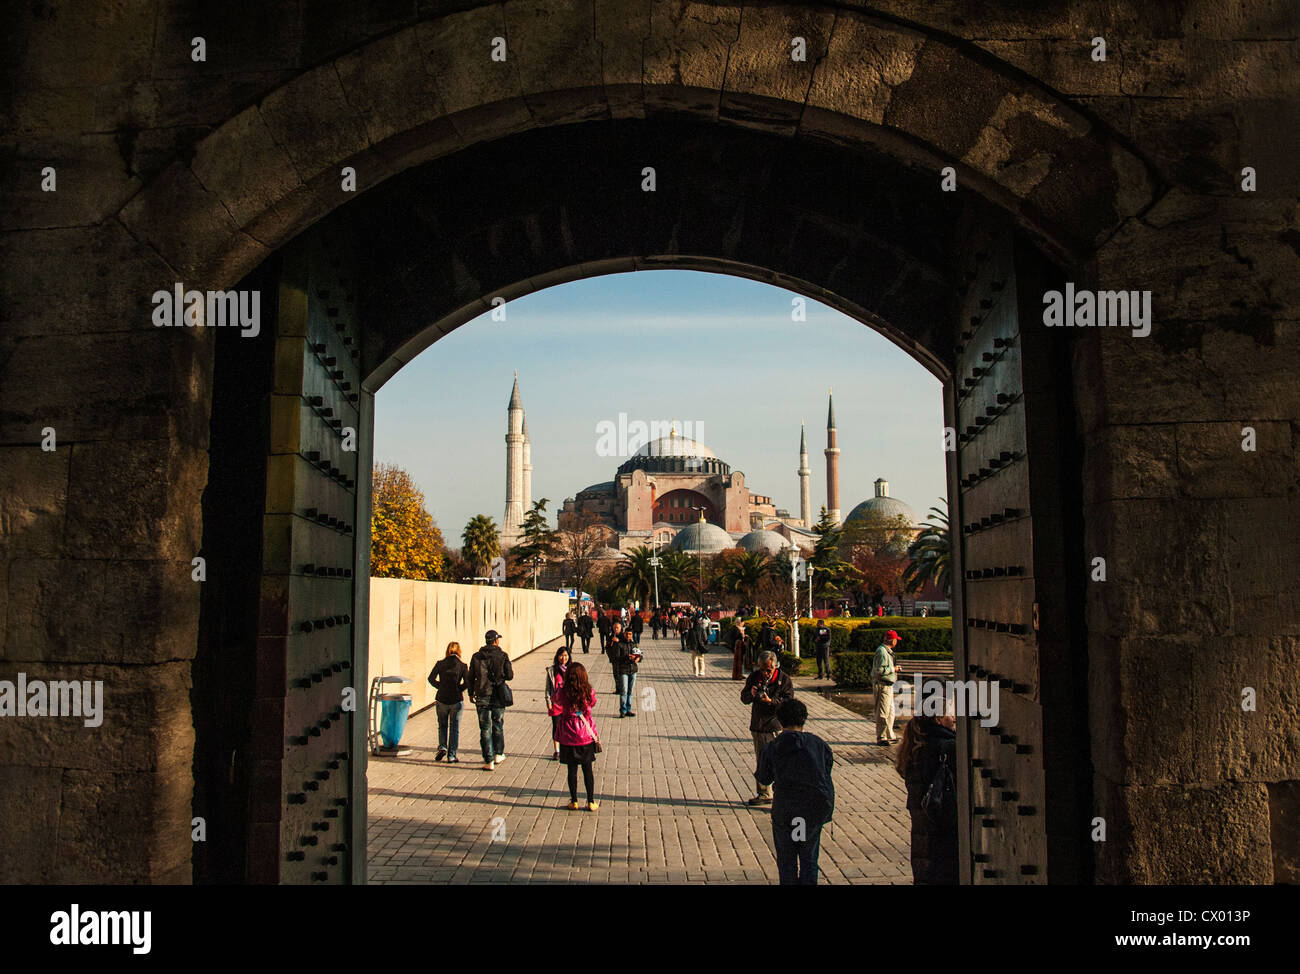 Aya Sofya or Haghia Sophia as seen through an arch in the Blue Mosque or Sultanahmet Camii in Istanbul Turkey Stock Photo